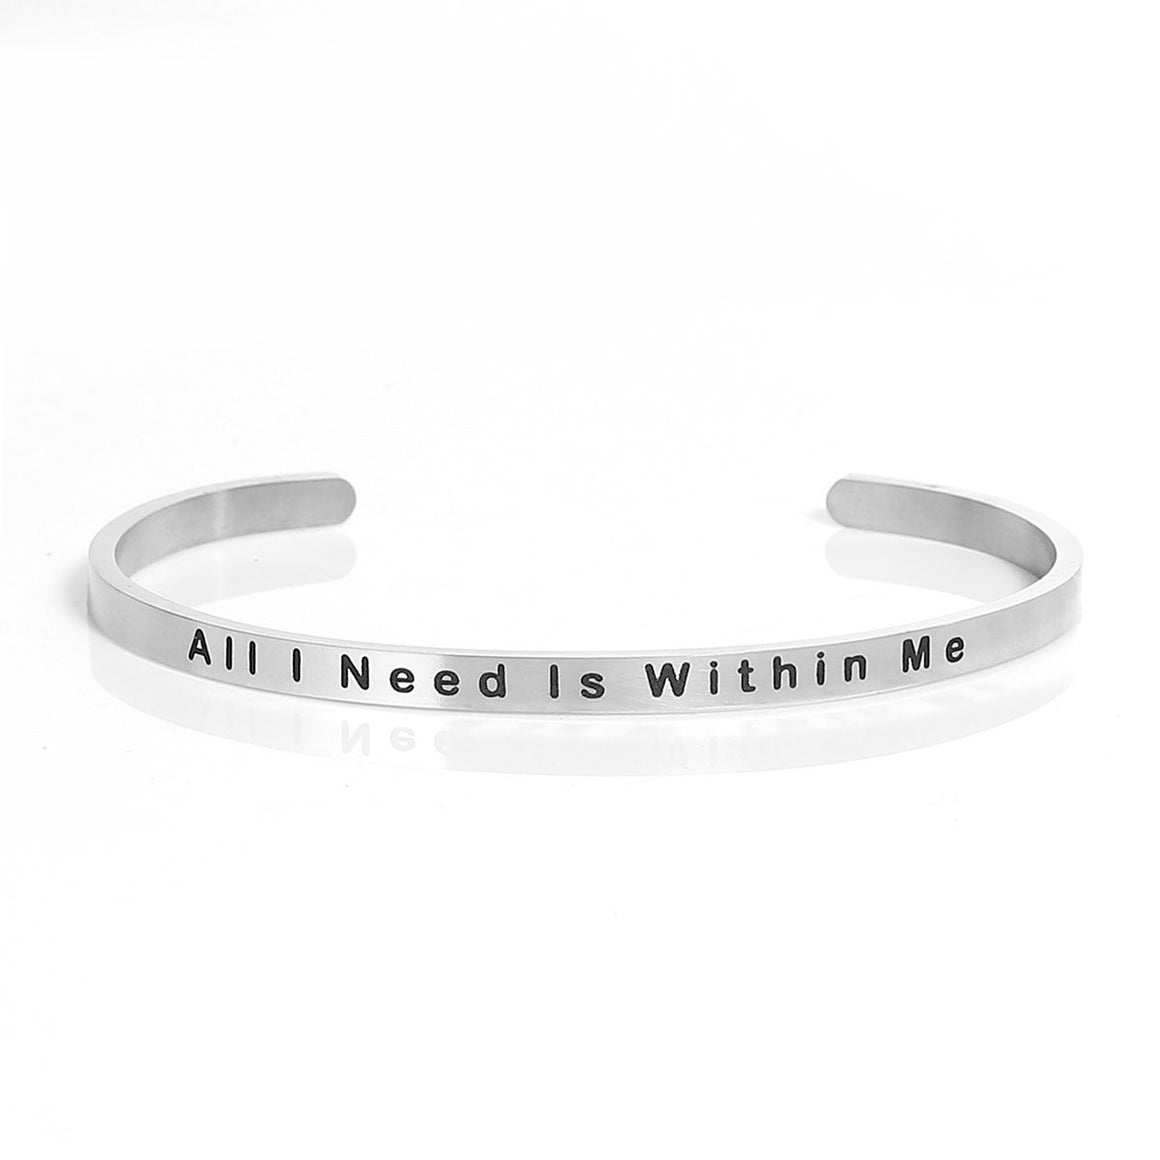 All I Need Is Within Me Stainless Steel Stacking Bangle Bracelet Inspirational Quote Bracelet Positive Energy Cuff Bracelet